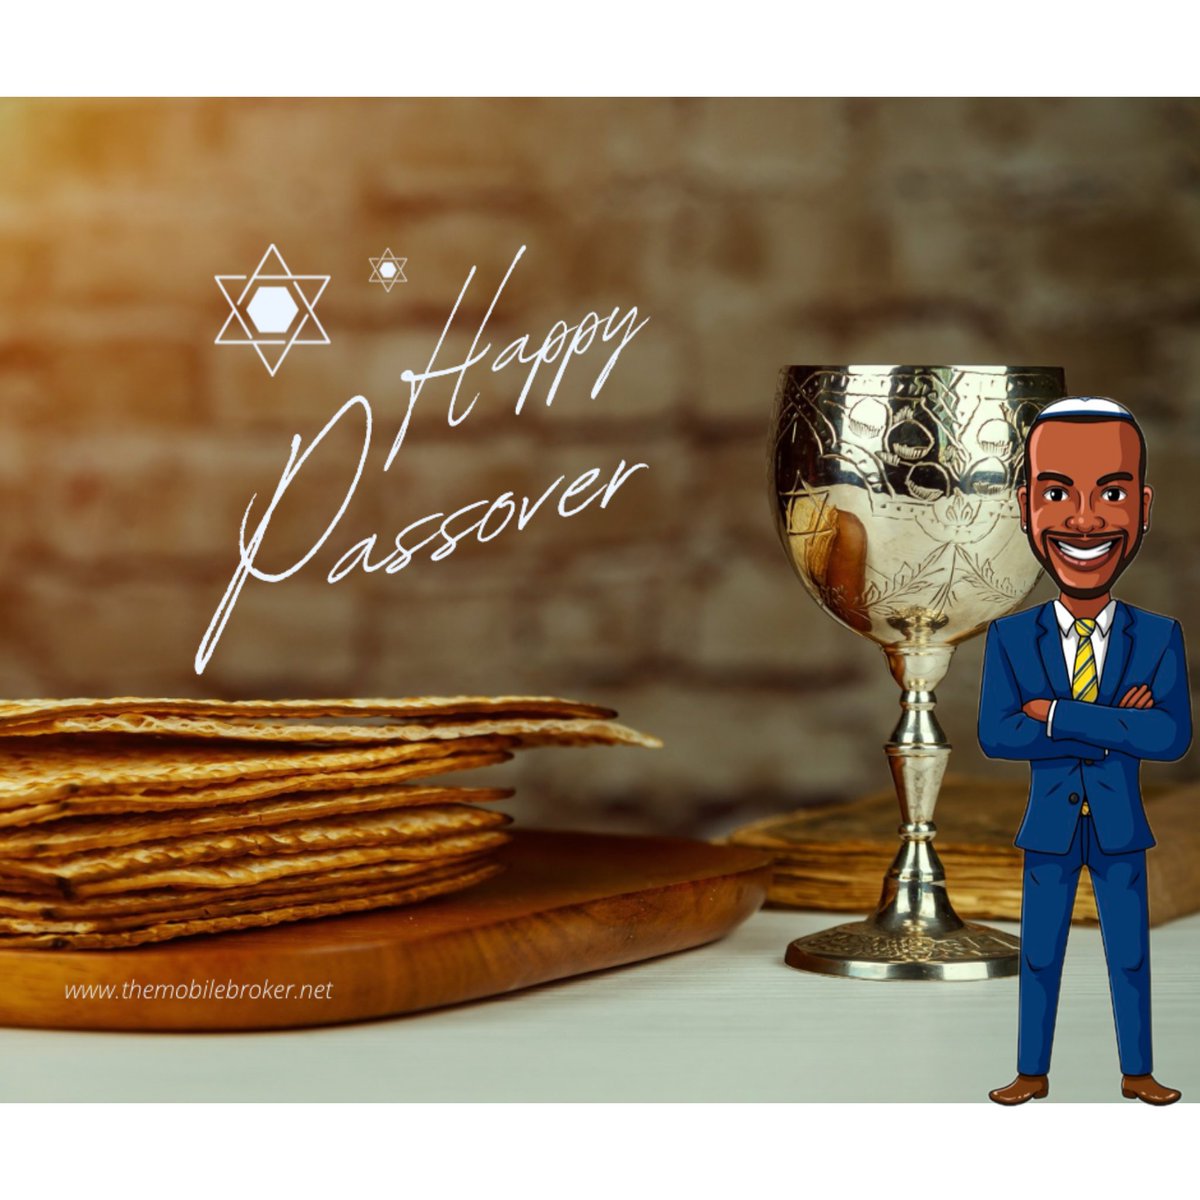 🌟 🕍  May your #Passover 🕍 be as prosperous as a New York City real estate deal! Wishing you a season of liberation and joy. #NYCRealEstate #HireARealtor #SayYesToCRS #SellingNYC #TheBrianPhillipsTeam #TheMobileBroker #DouglasElliman #EllimanNYC 🏙️✡️